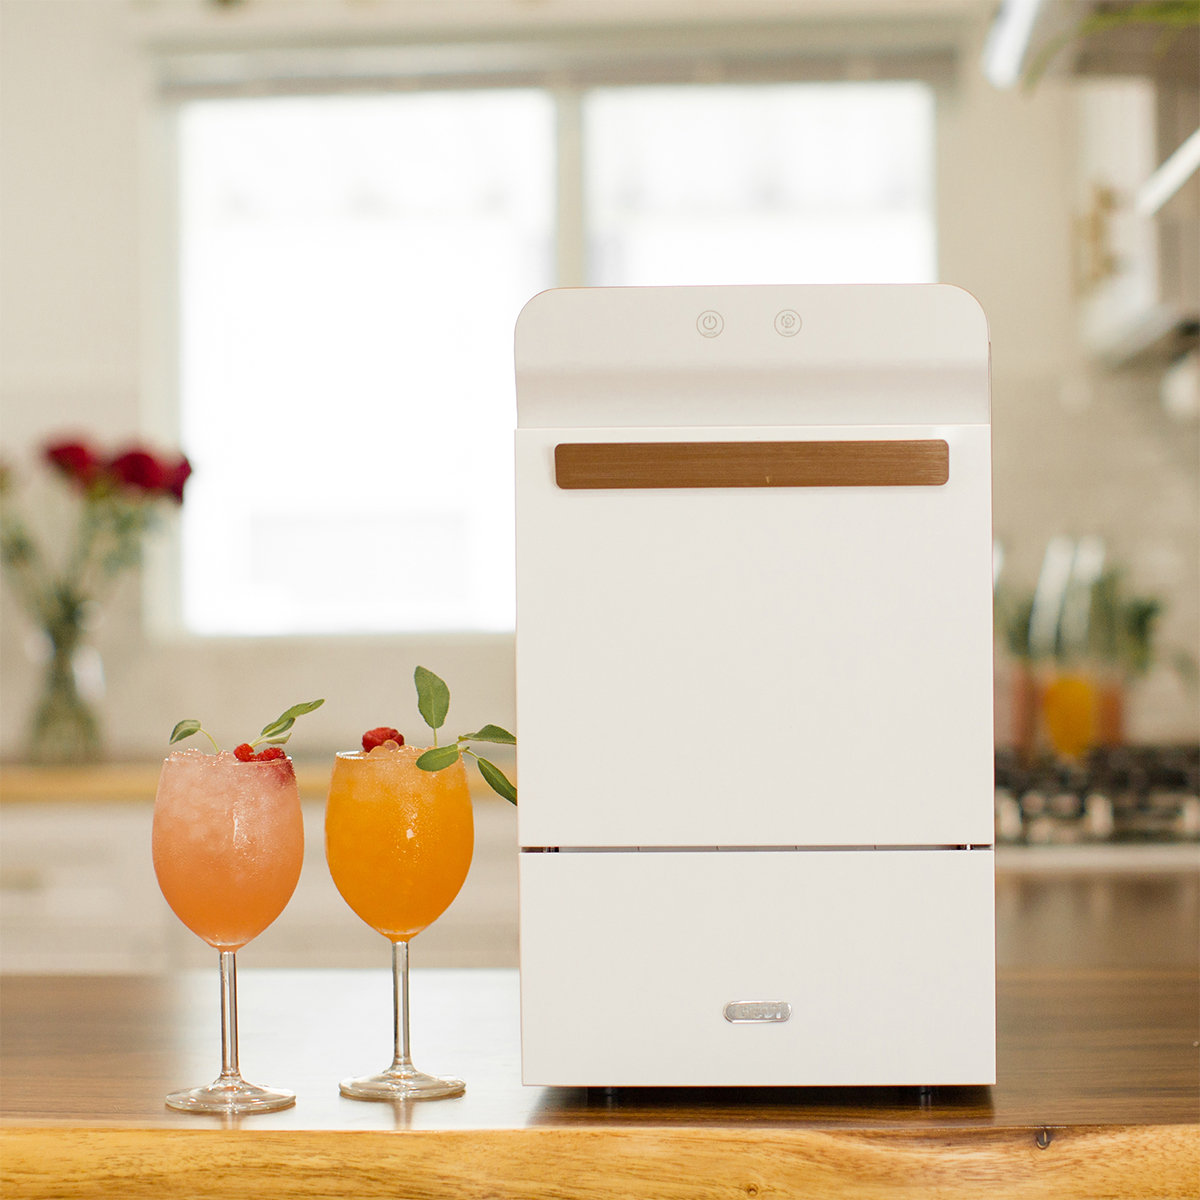 Product Review : Gevi Nugget Ice Maker 